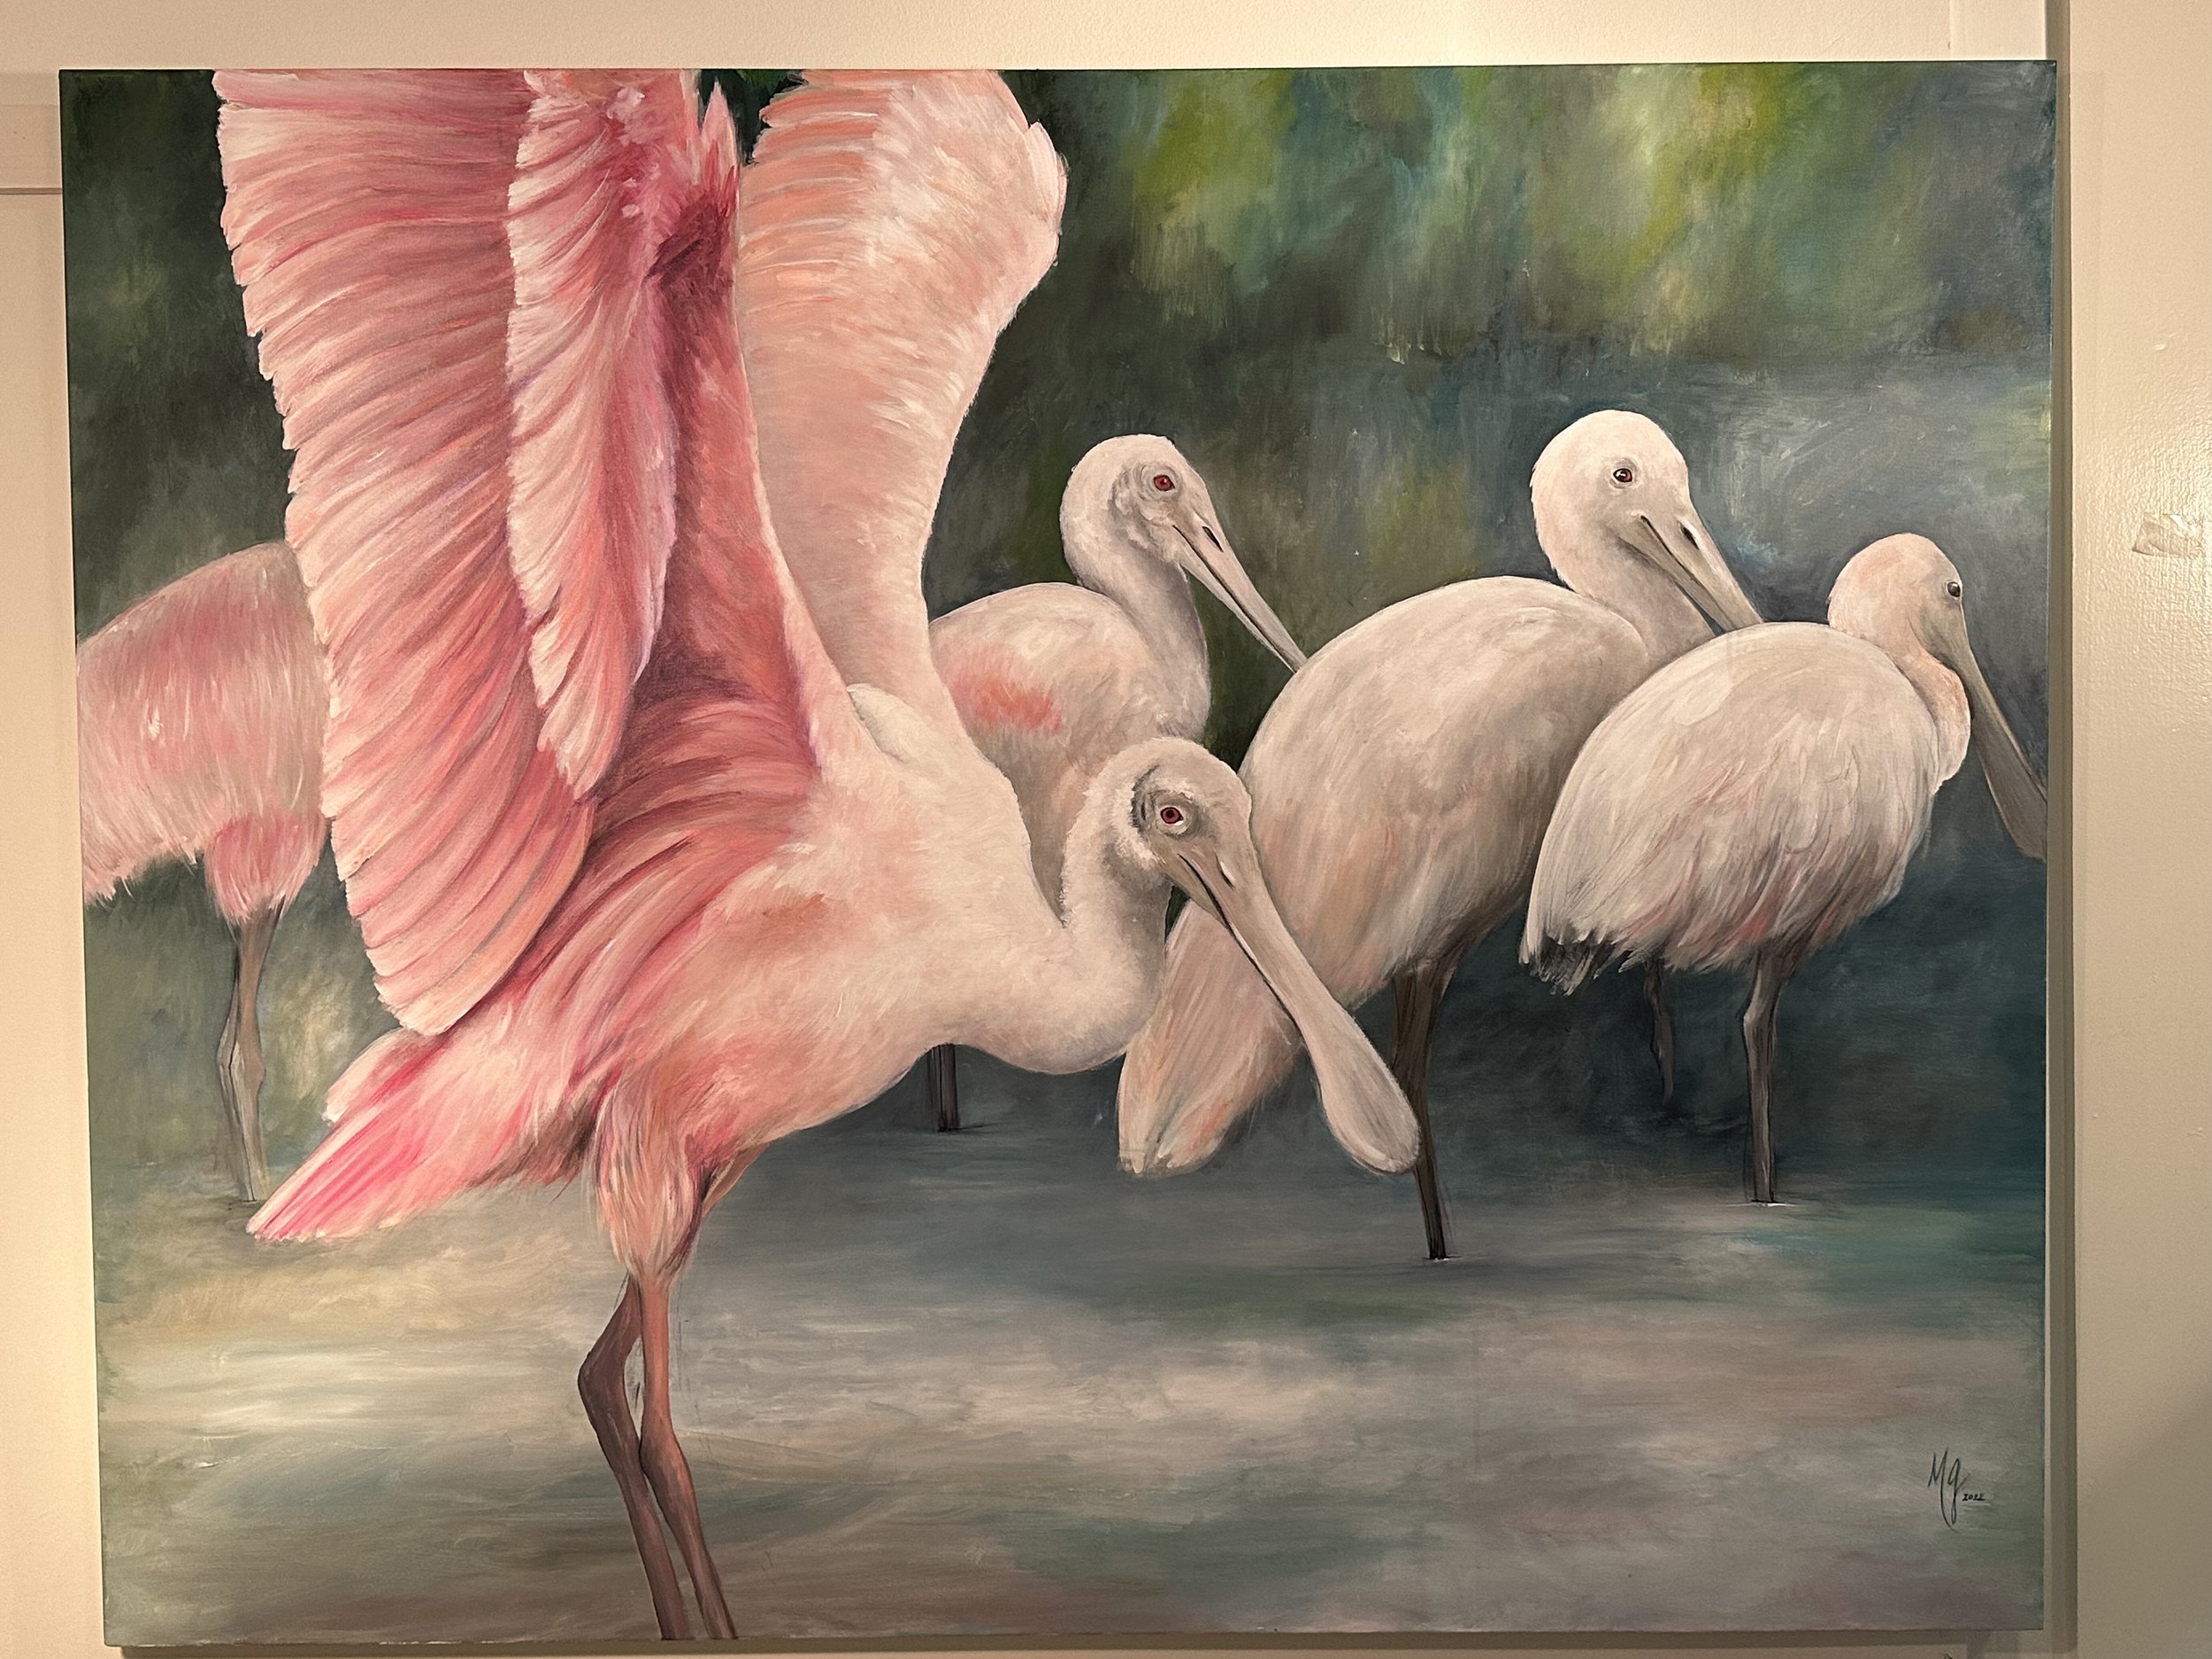  “Pretty in Pink” - Roseate Spoonbills     36” x 48”    Acrylic on canvas    Commissioned for a living room in Roswell, GA  